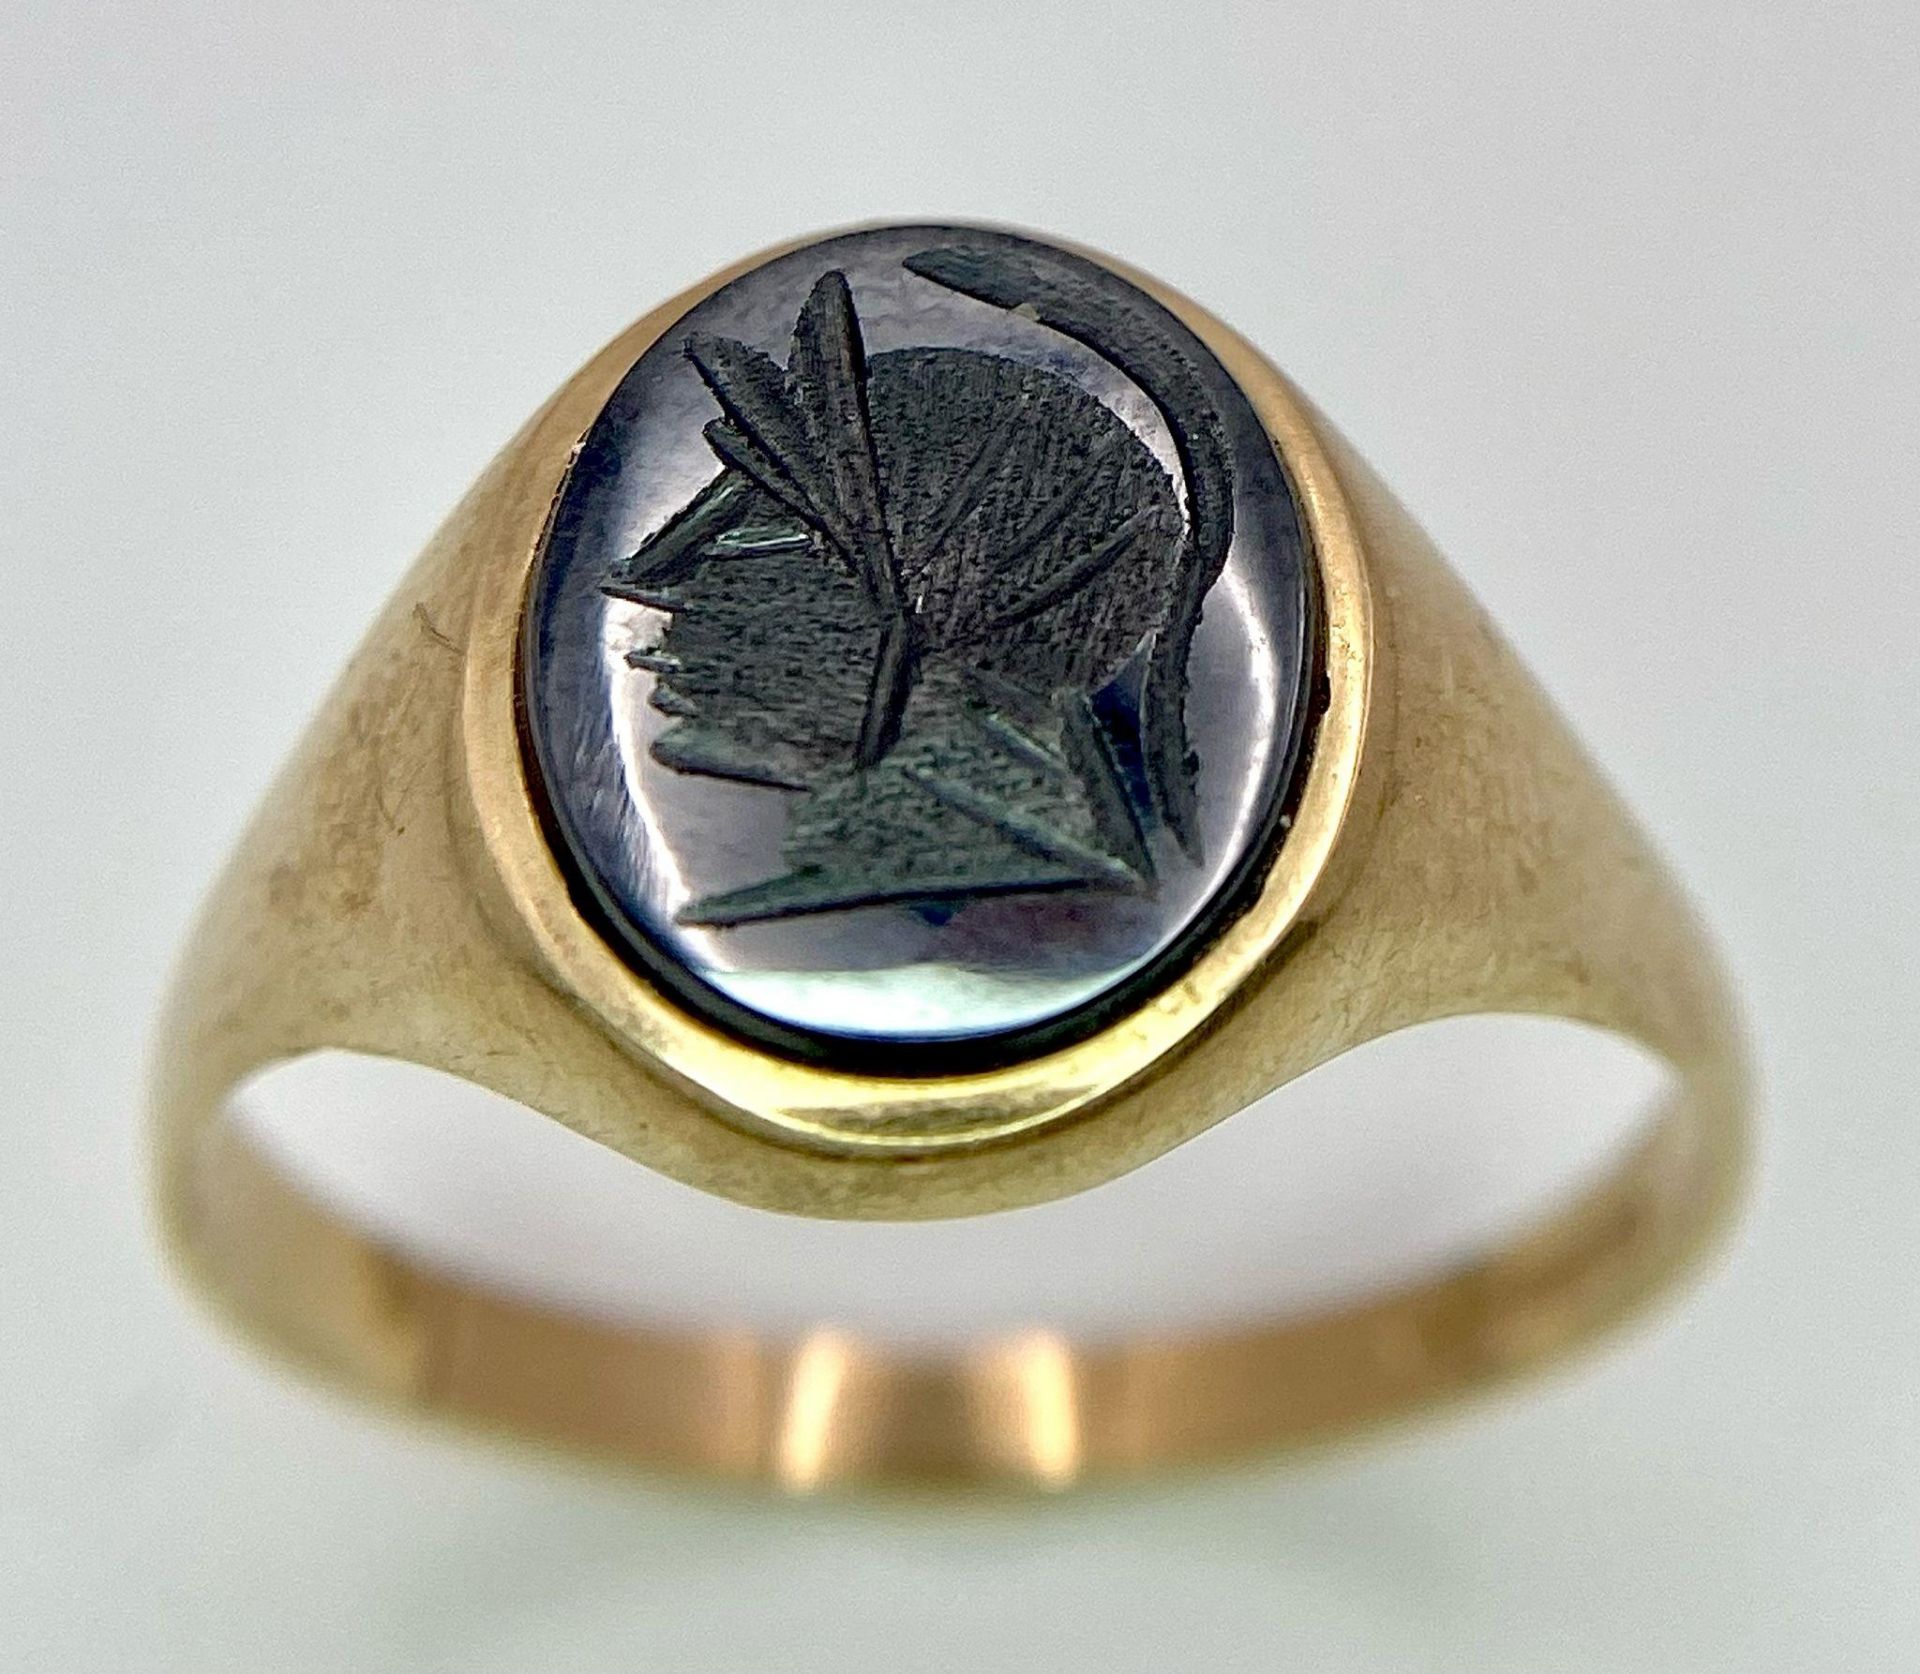 A Vintage 9K Yellow Gold Onyx Signet Ring. Carved centurion decoration. Size T. 3g total weight. - Image 4 of 6